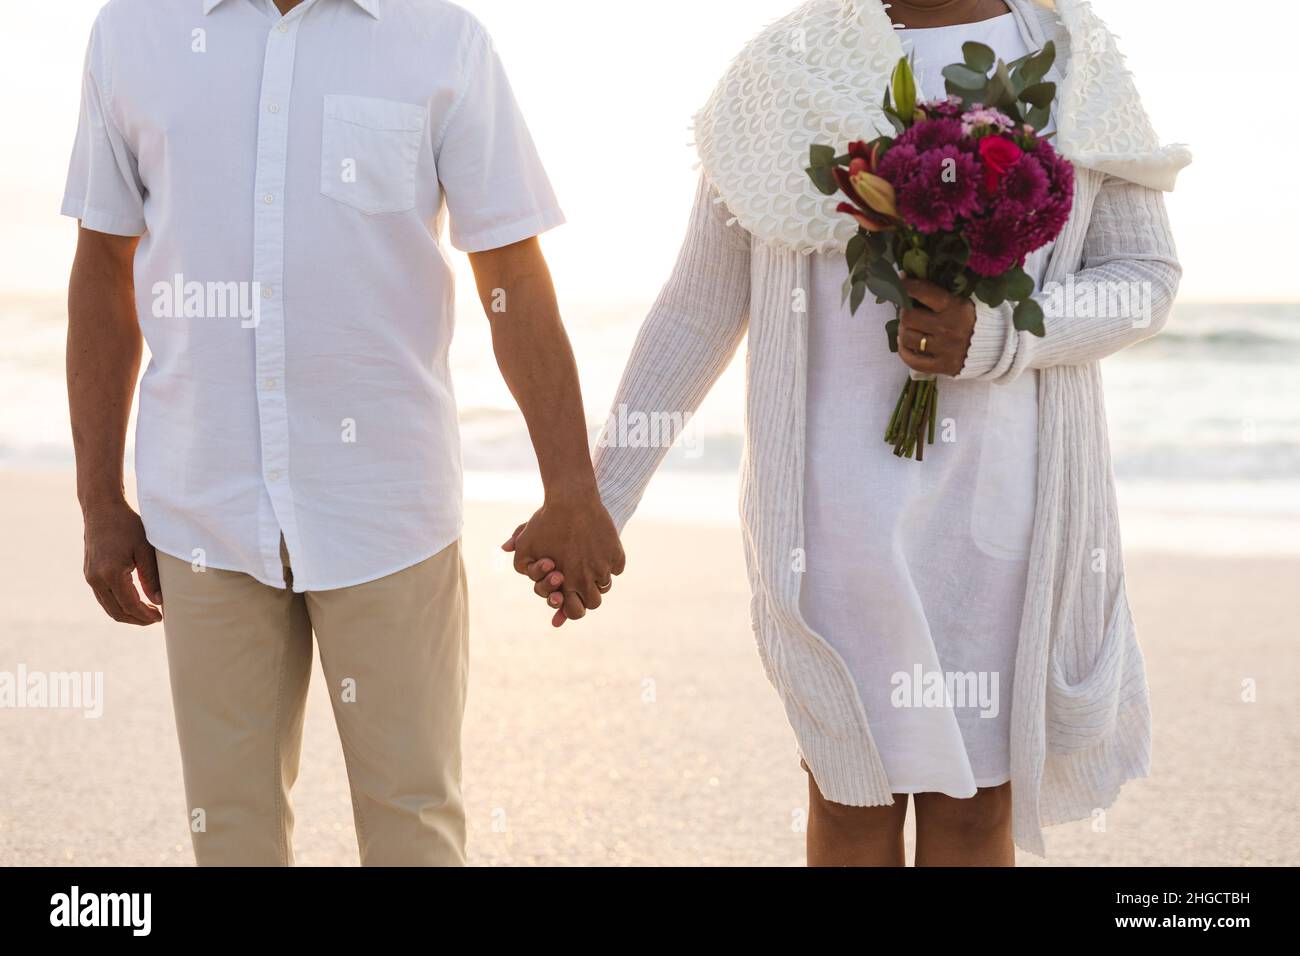 Midsection of biracial man holding hands with woman holding flower bouquet at beach wedding ceremony Stock Photo